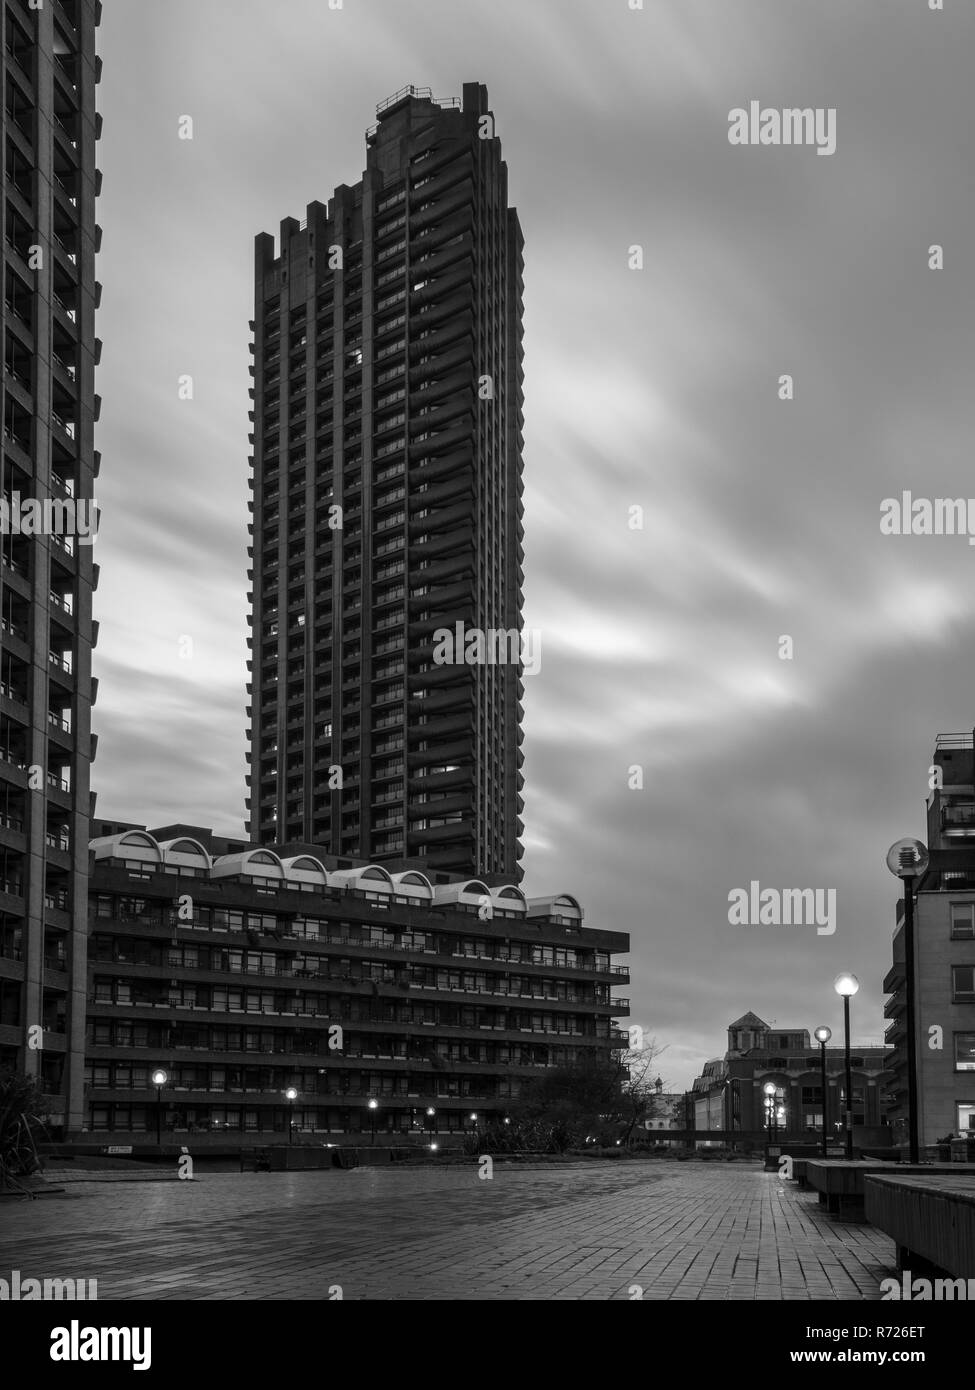 London, England, UK - April 4, 2018: Clouds are blown over the brutalist concrete high rise apartment blocks of the Barbican Estate in London. Stock Photo